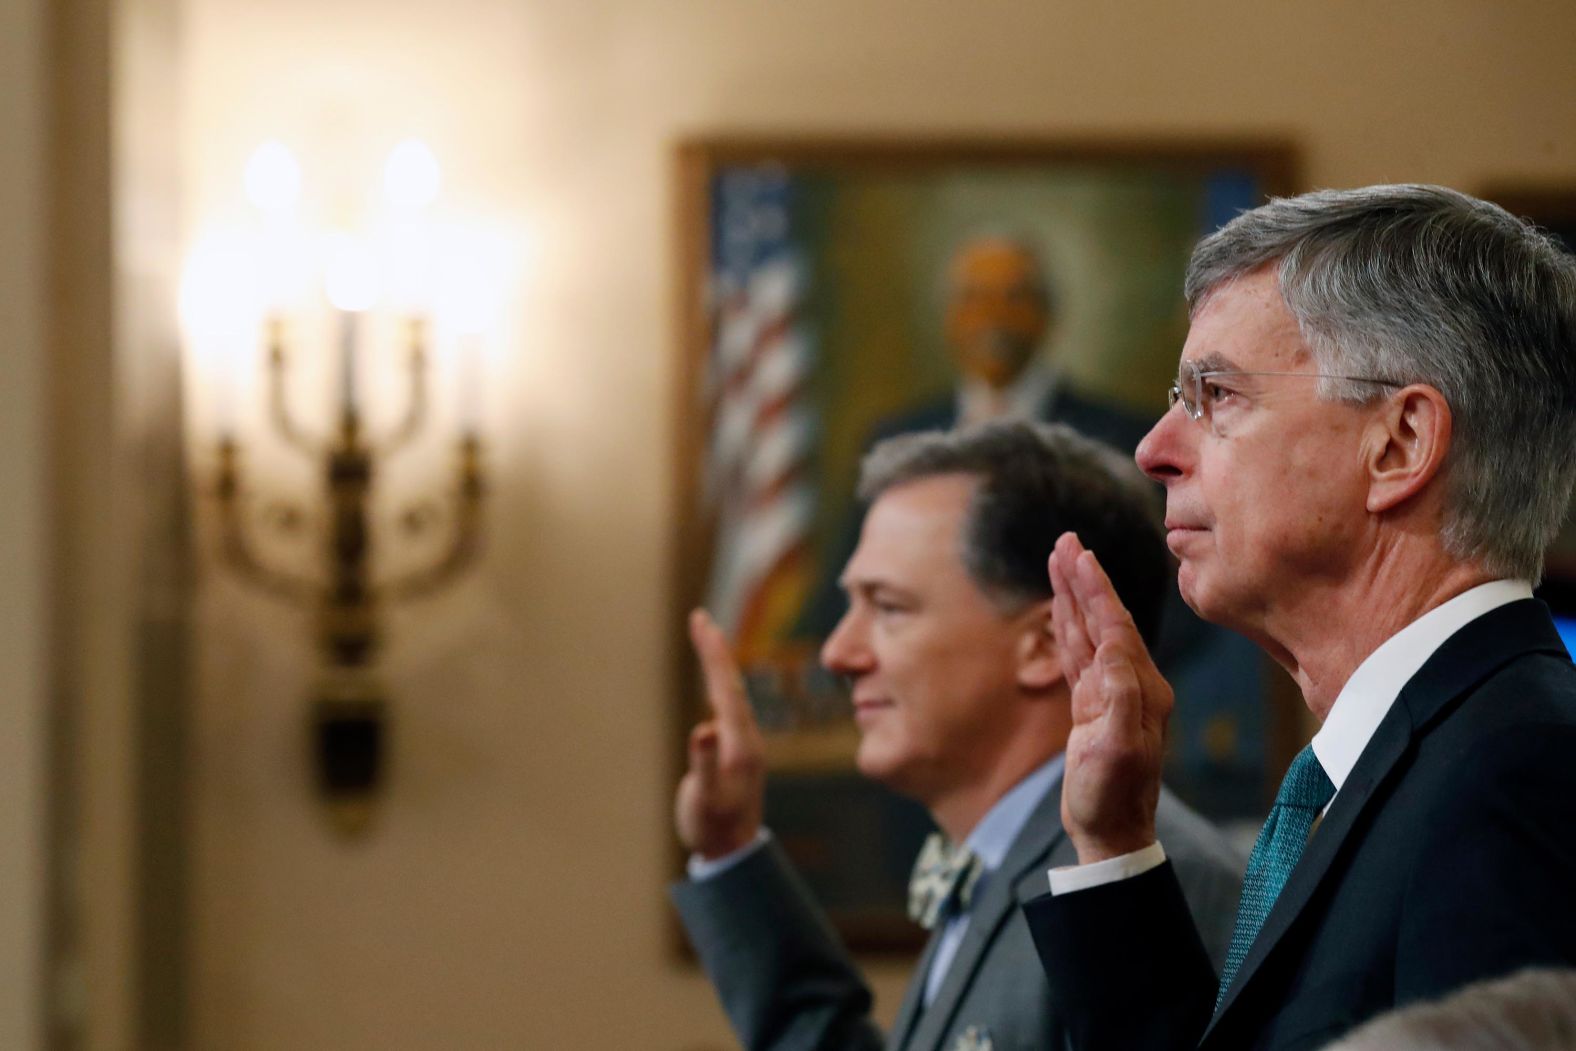 From right, diplomats Bill Taylor and George Kent are sworn in before testifying to the House Intelligence Committee on November 13. It was the <a href="https://www.cnn.com/2019/11/13/politics/public-impeachment-hearings-day-1/index.html" target="_blank">first public hearing</a> related to the inquiry. Taylor is the top US diplomat in Ukraine. Kent is the deputy assistant secretary at the State Department's Bureau of European and Eurasian Affairs.